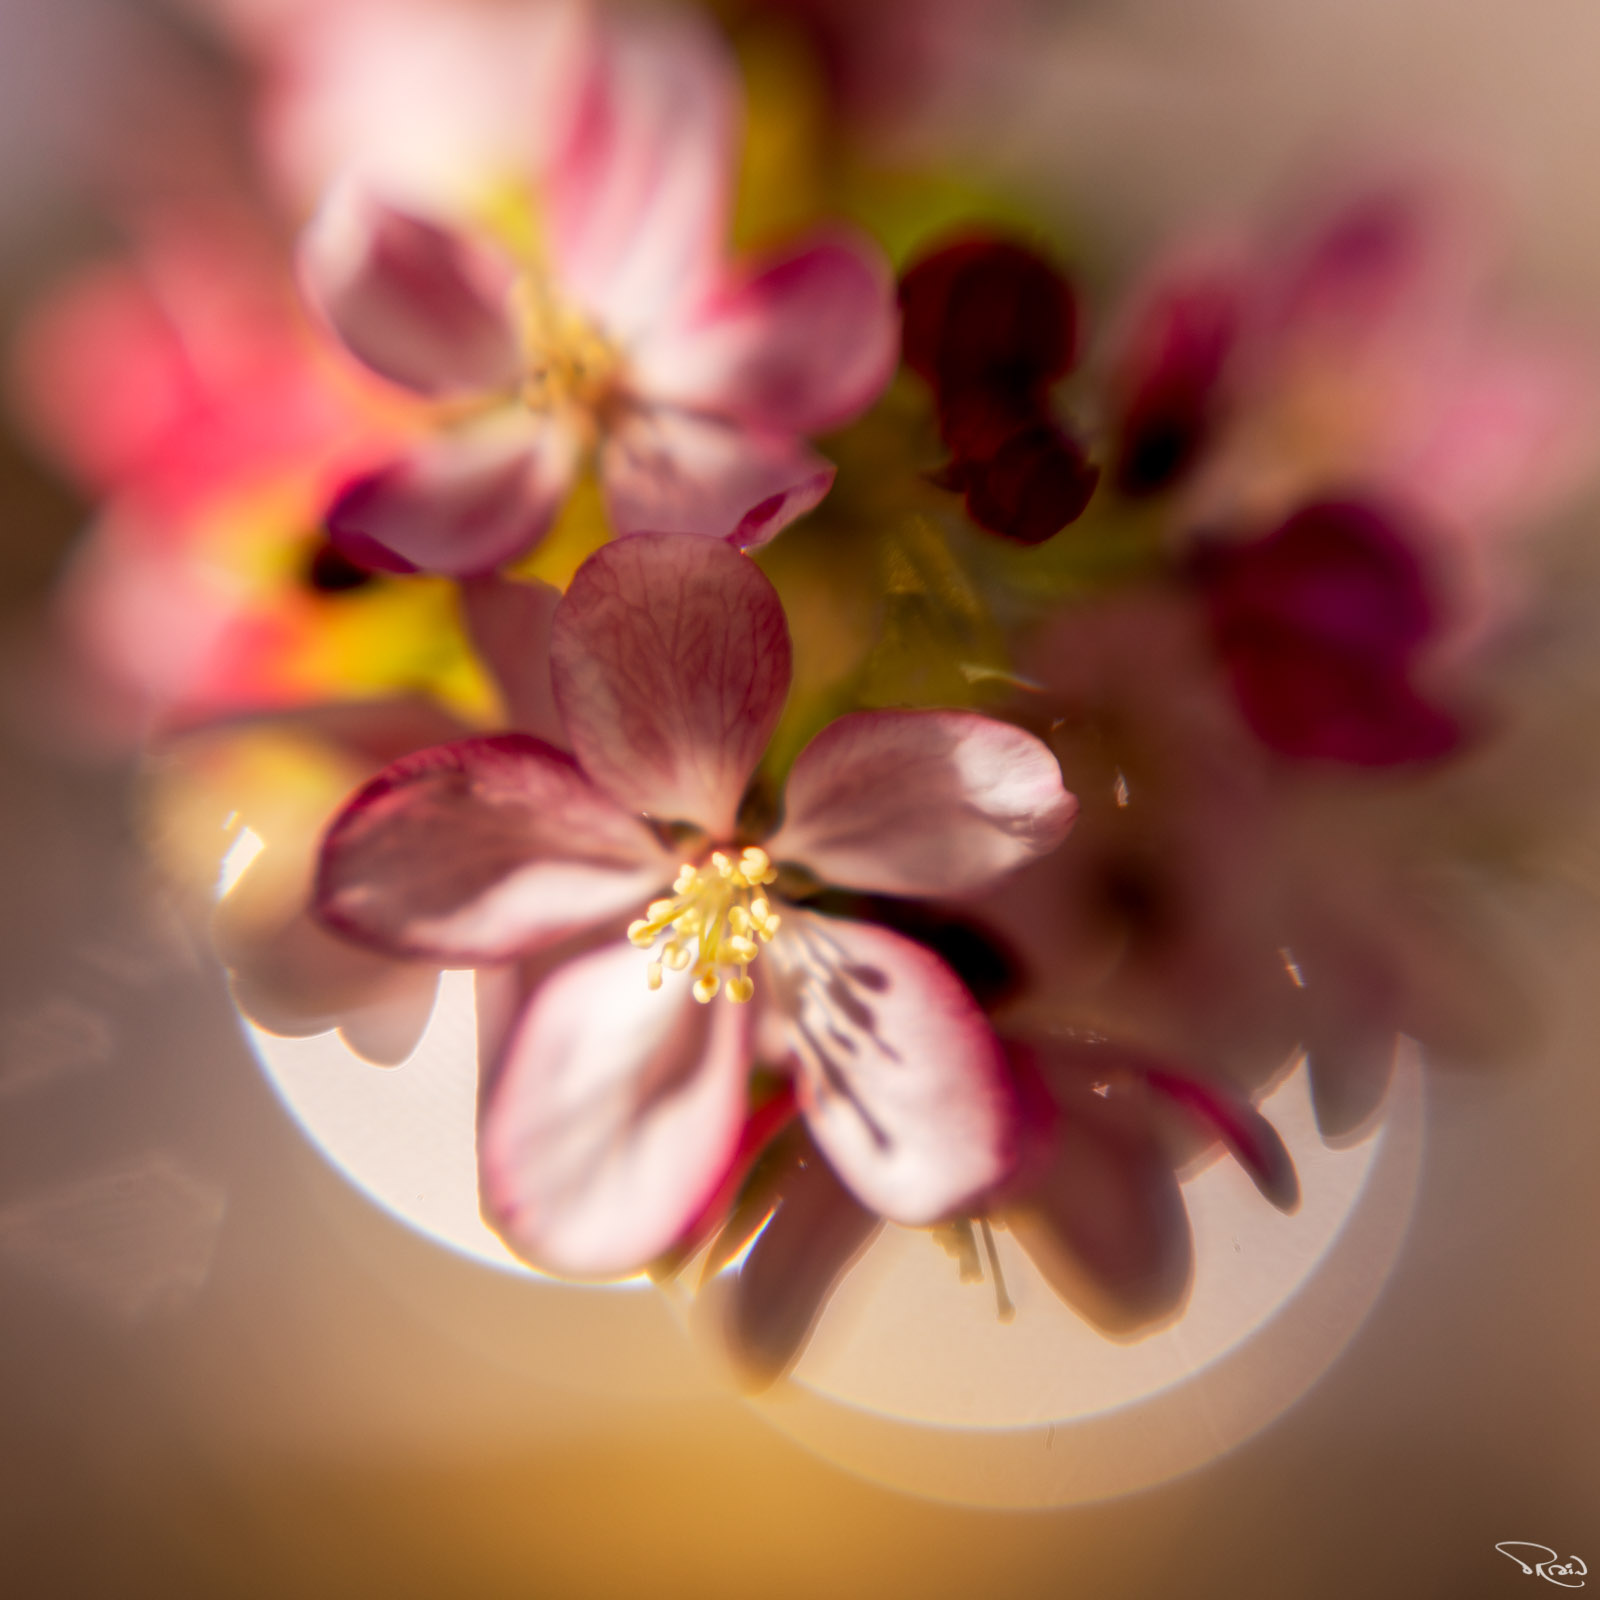 A stylized, slightly abstract portrayal of springtime cherry blossoms